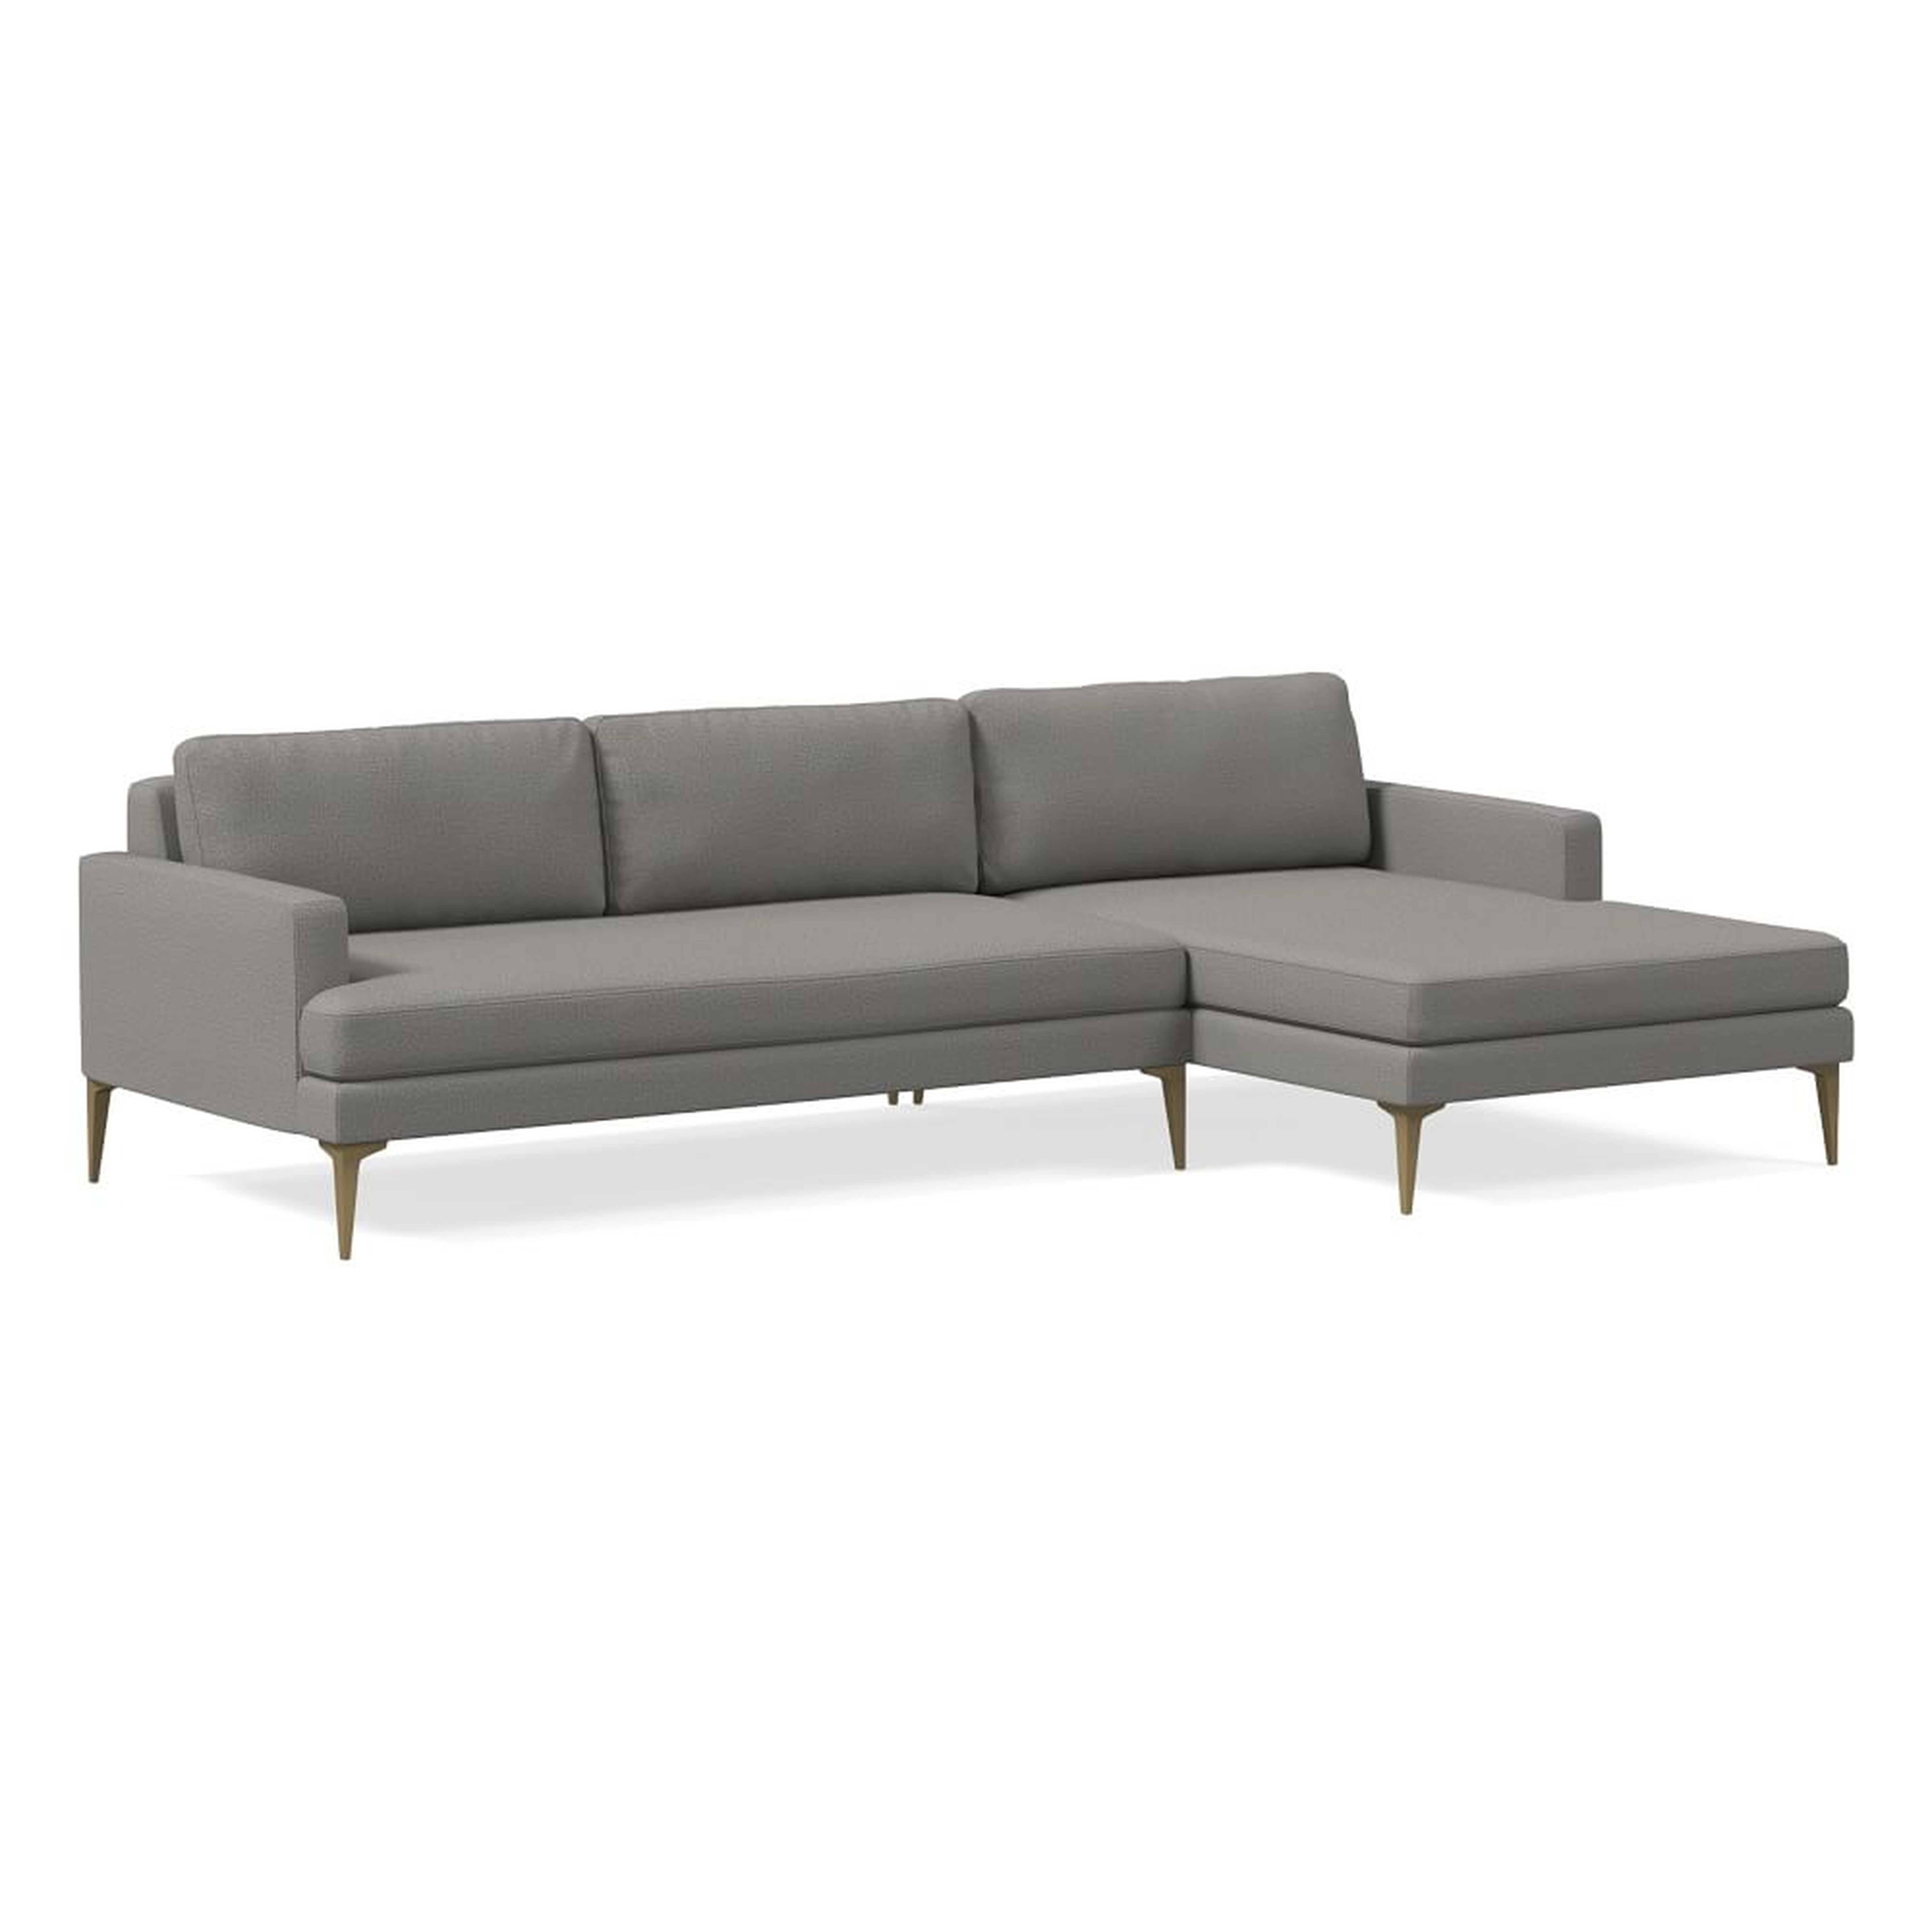 Andes Sectional Set 17: Left Arm 2.5 Seater Sofa, Right Arm Chaise, Poly, Performance Chenille Tweed, Silver, Blackened Brass - West Elm